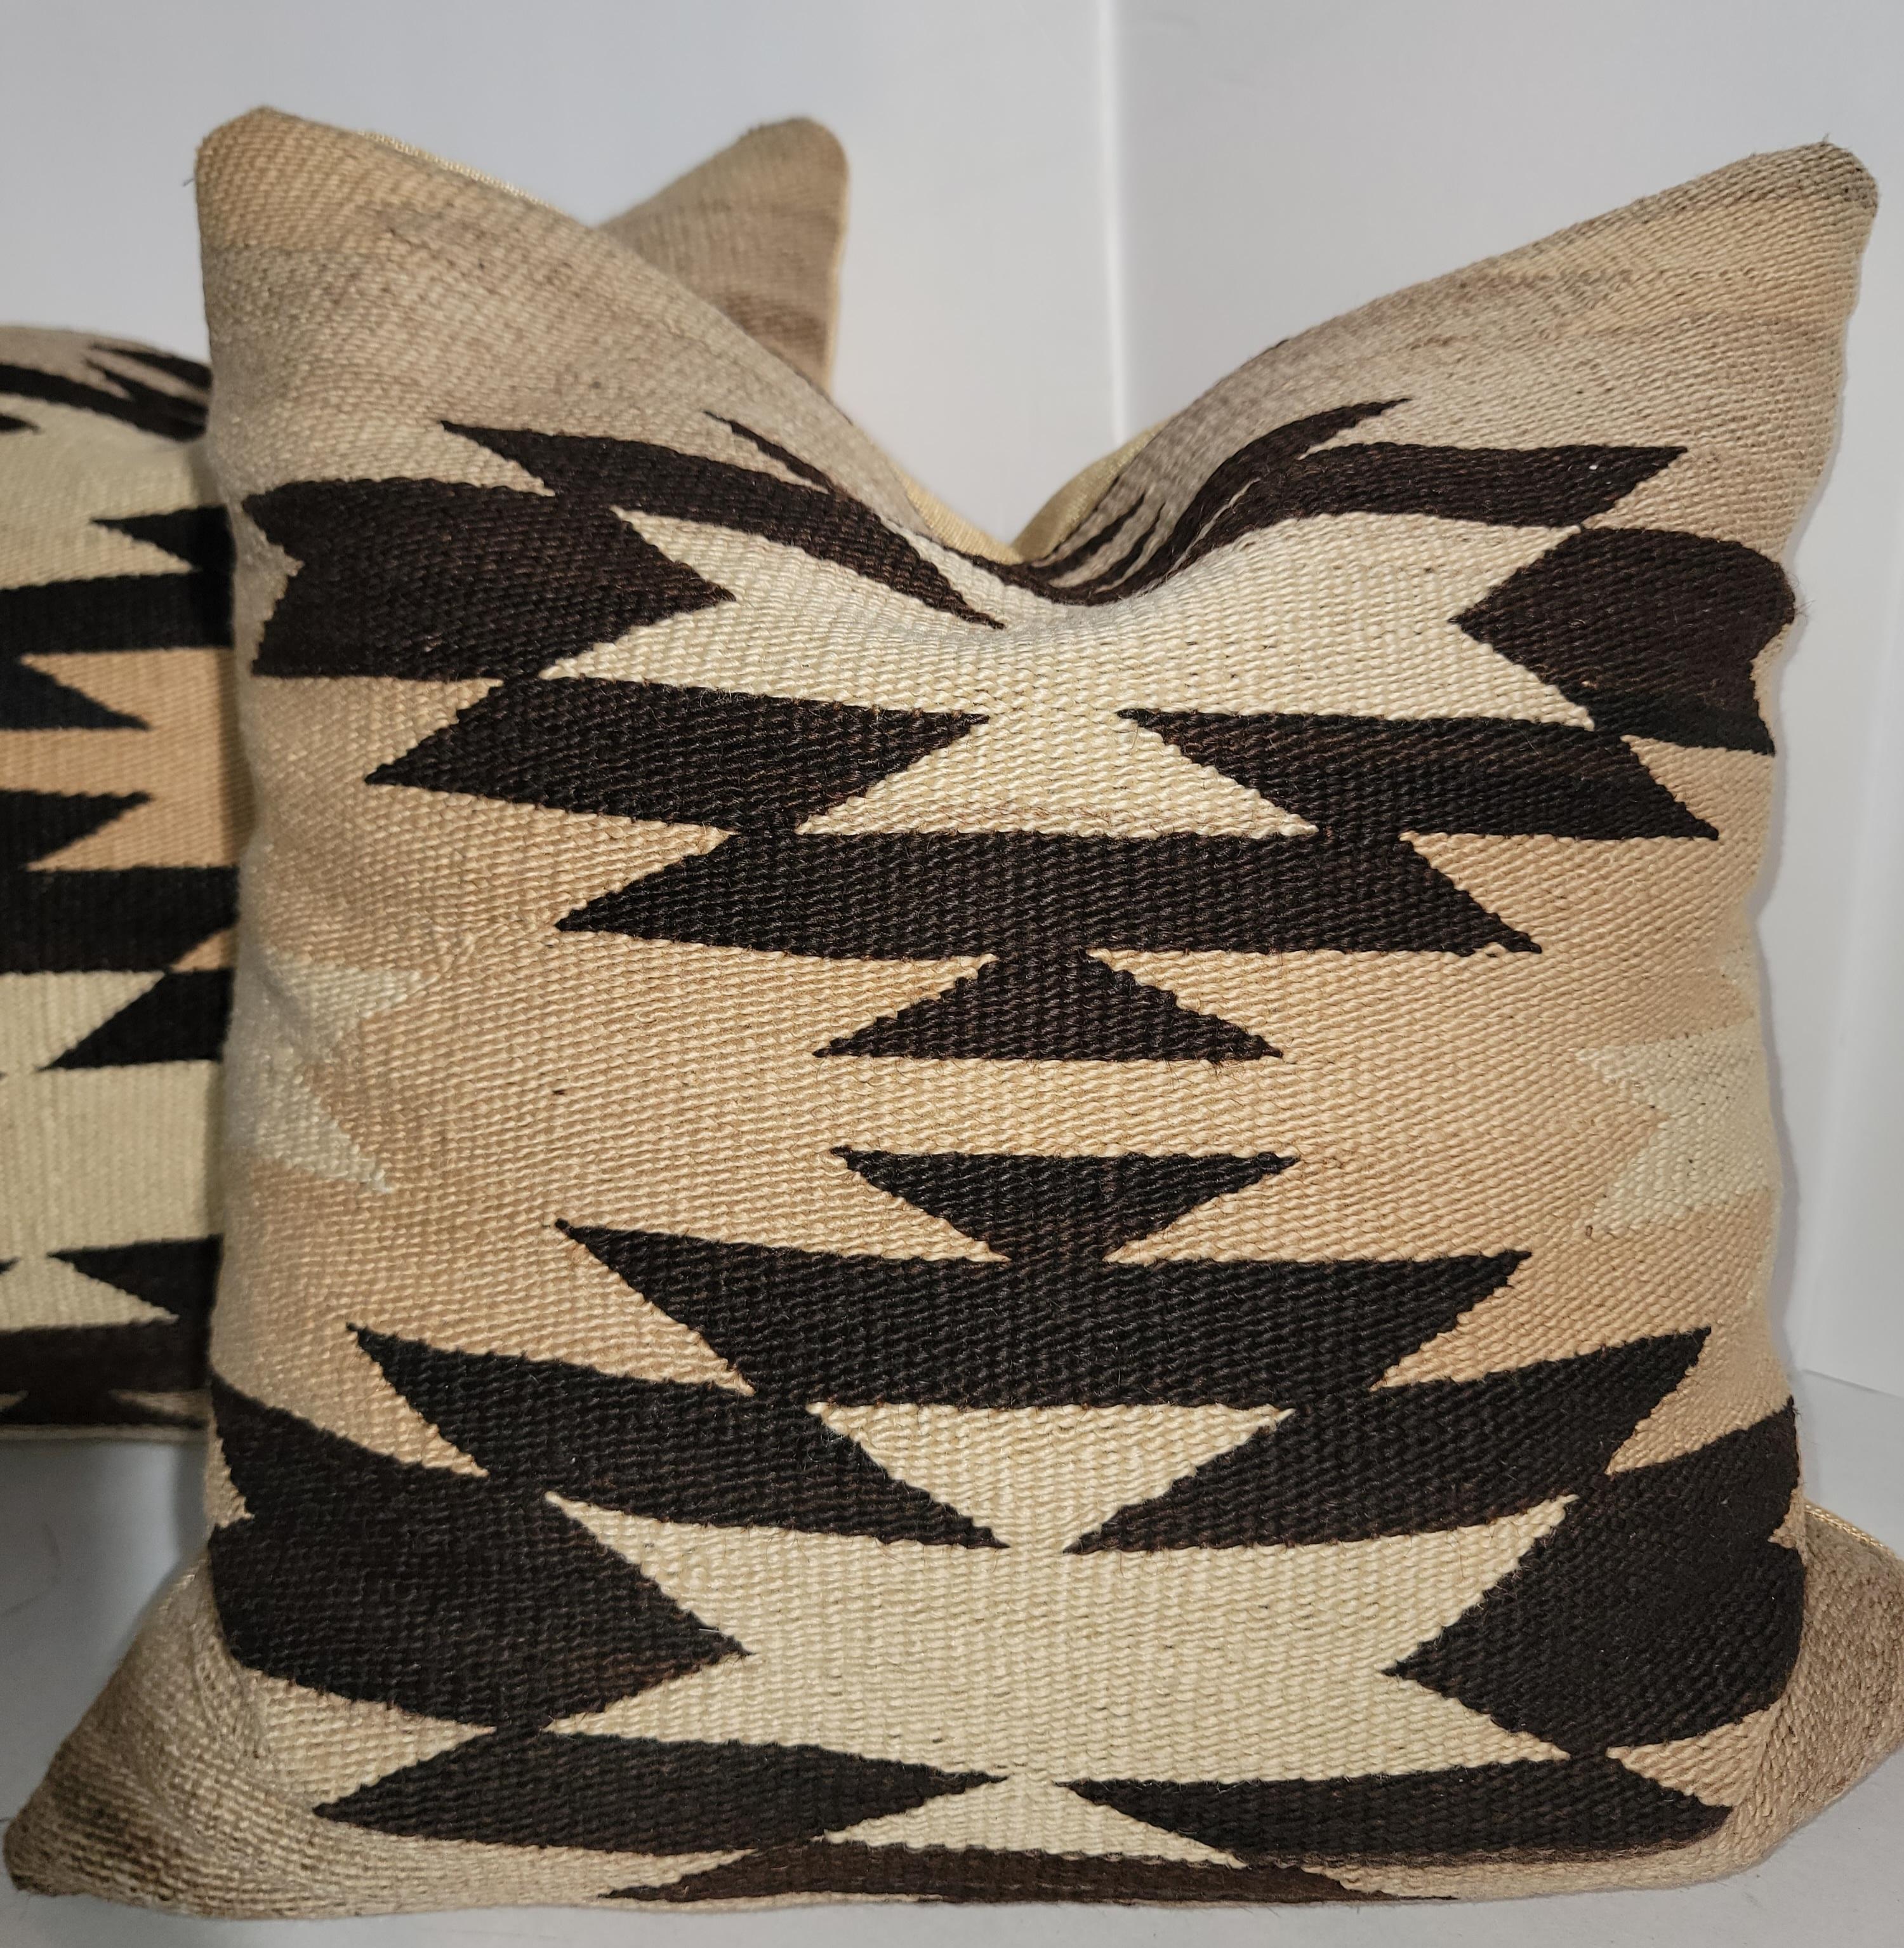 Adirondack Navajo Indian Weaving Pillows, Collection of Three Pillows For Sale